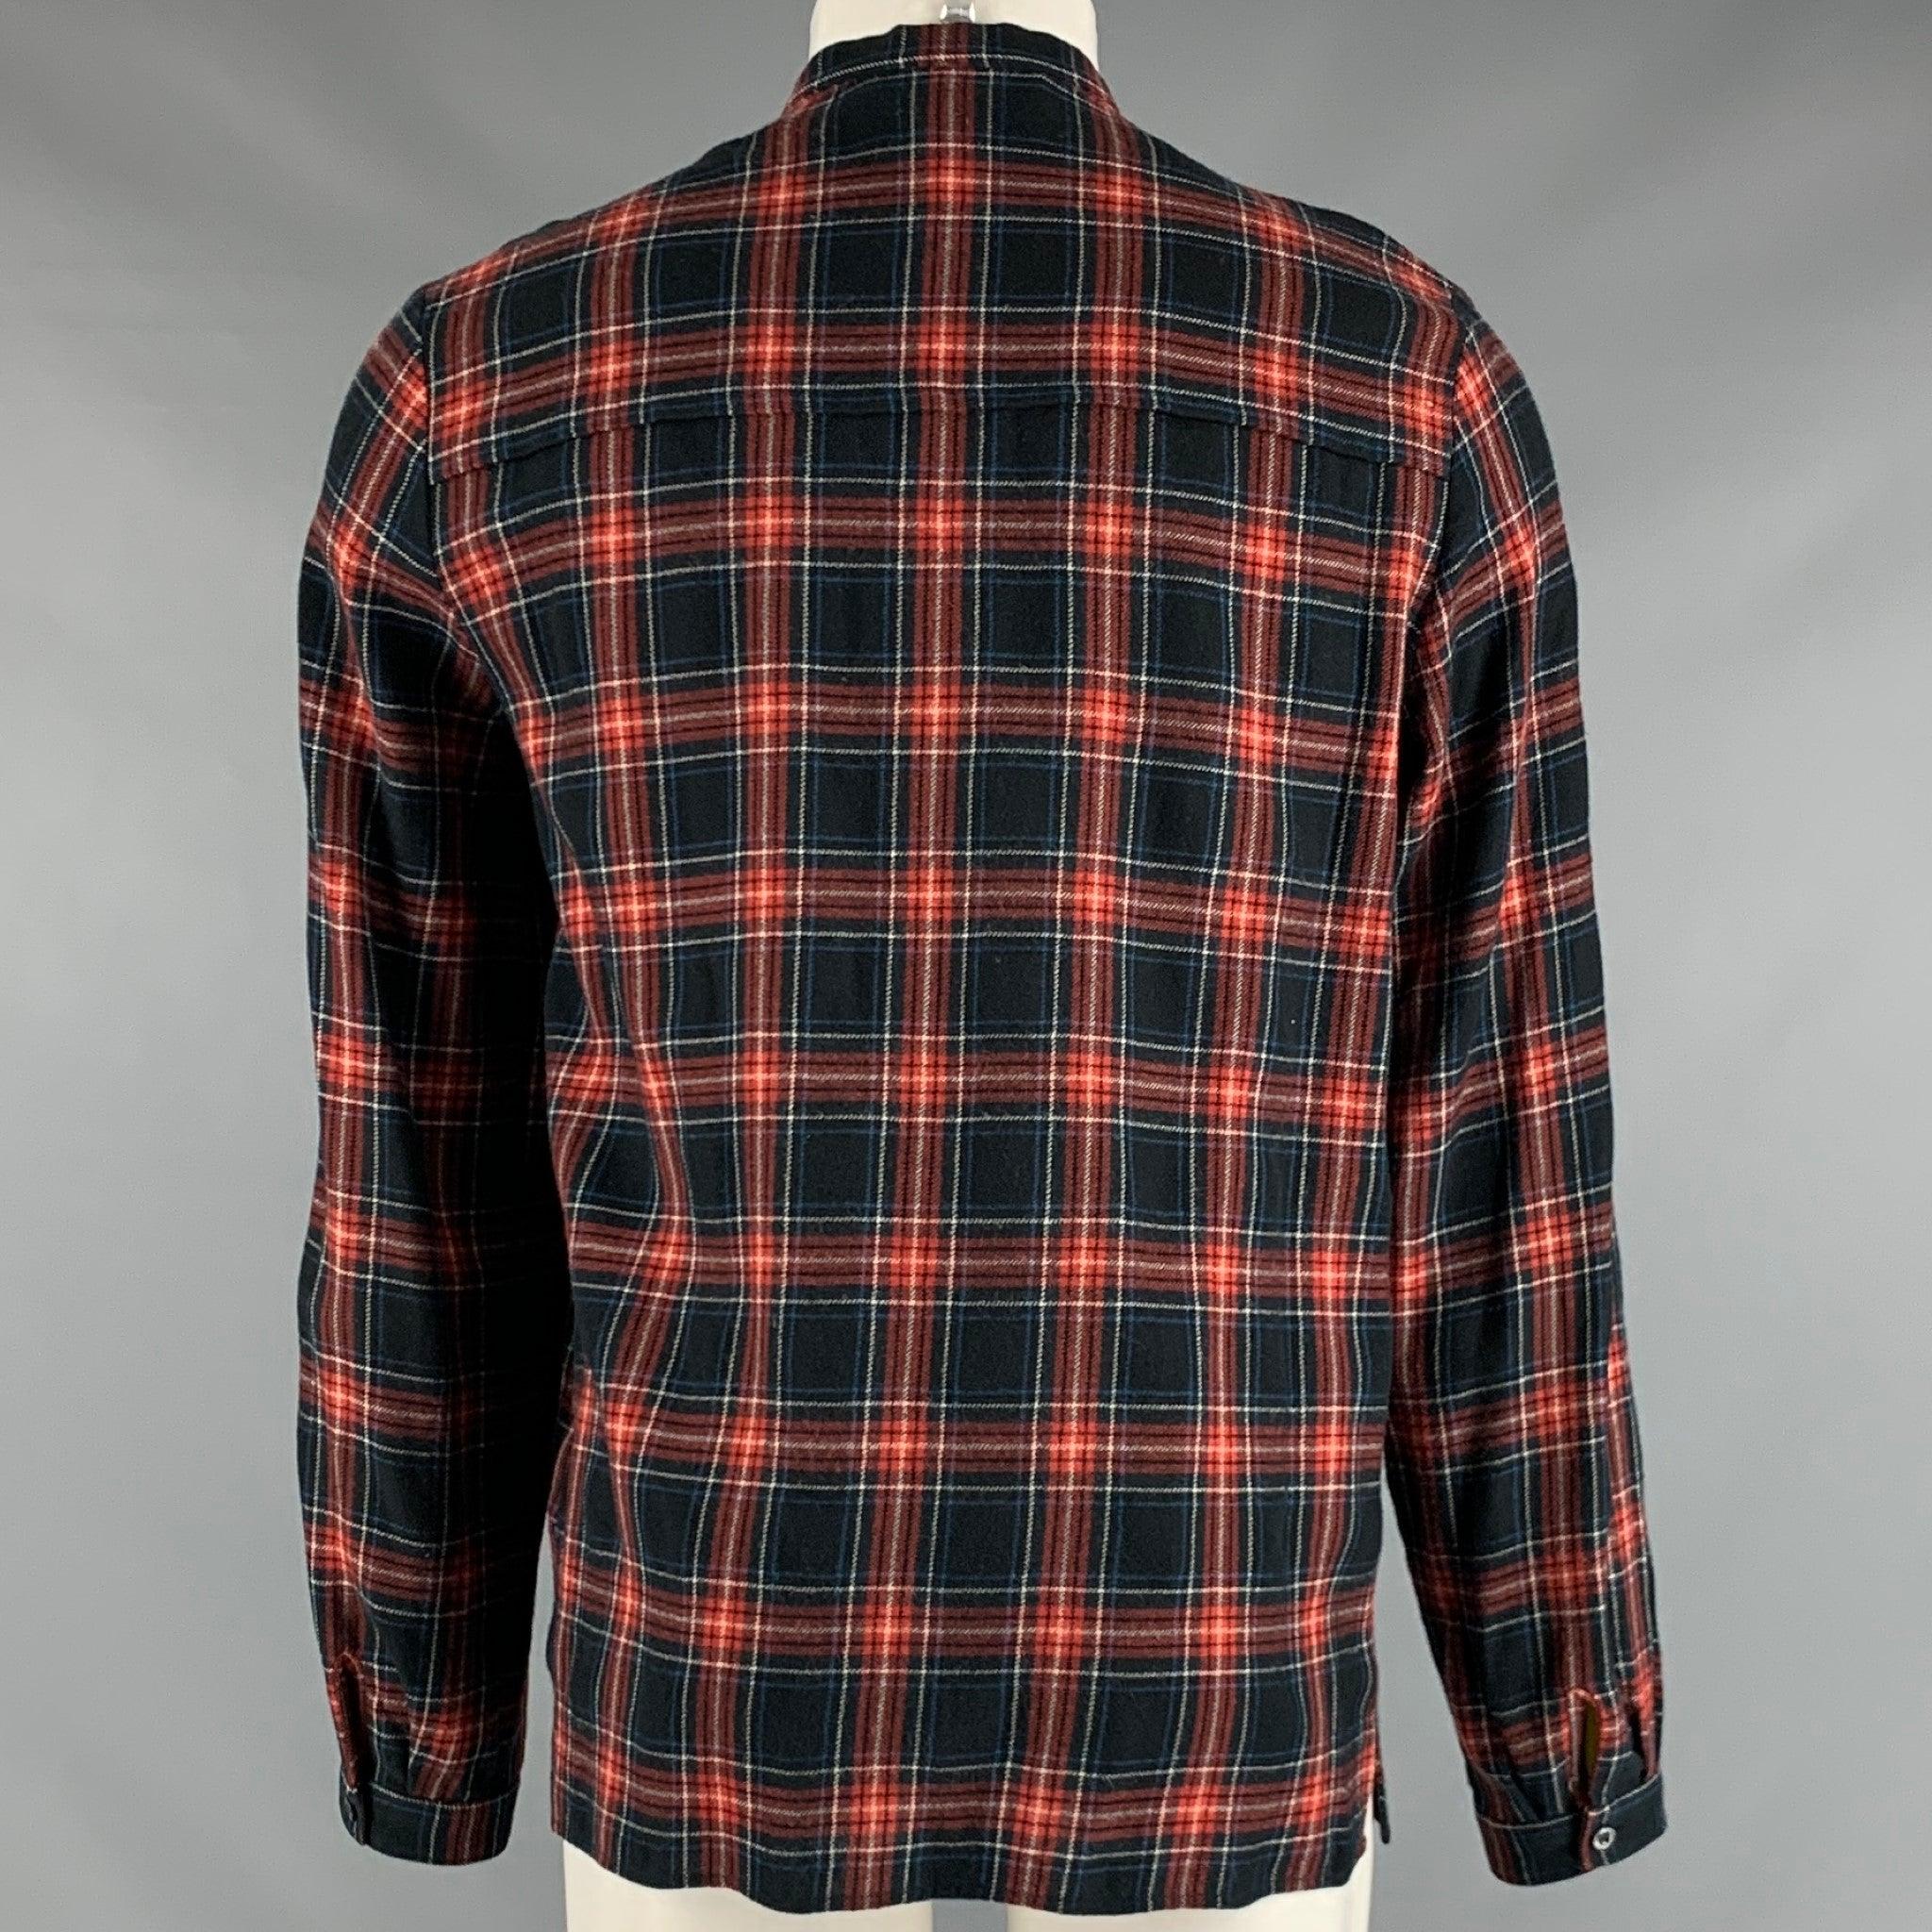 GUCCI Size M Black Red Blue Plaid Cotton Bow Long Sleeve Shirt In Good Condition For Sale In San Francisco, CA